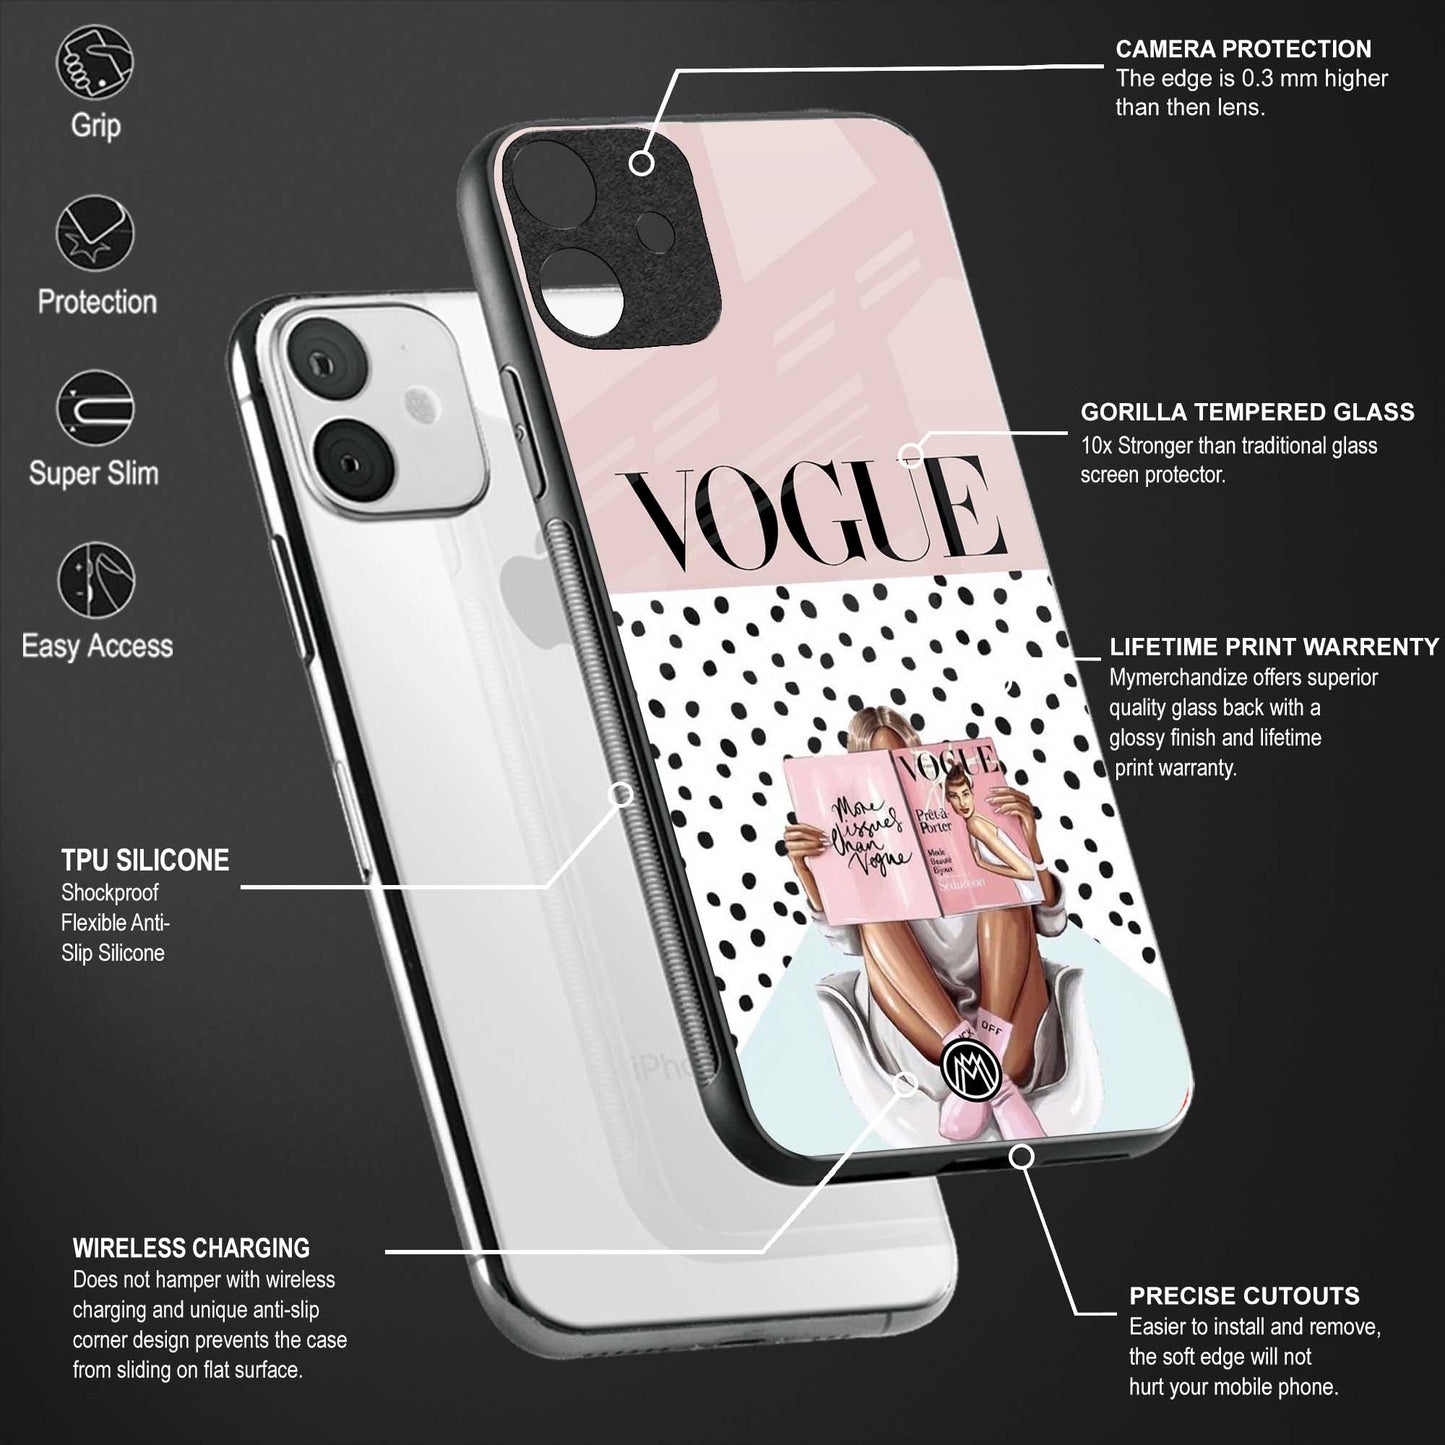 vogue queen glass case for redmi note 7 image-4